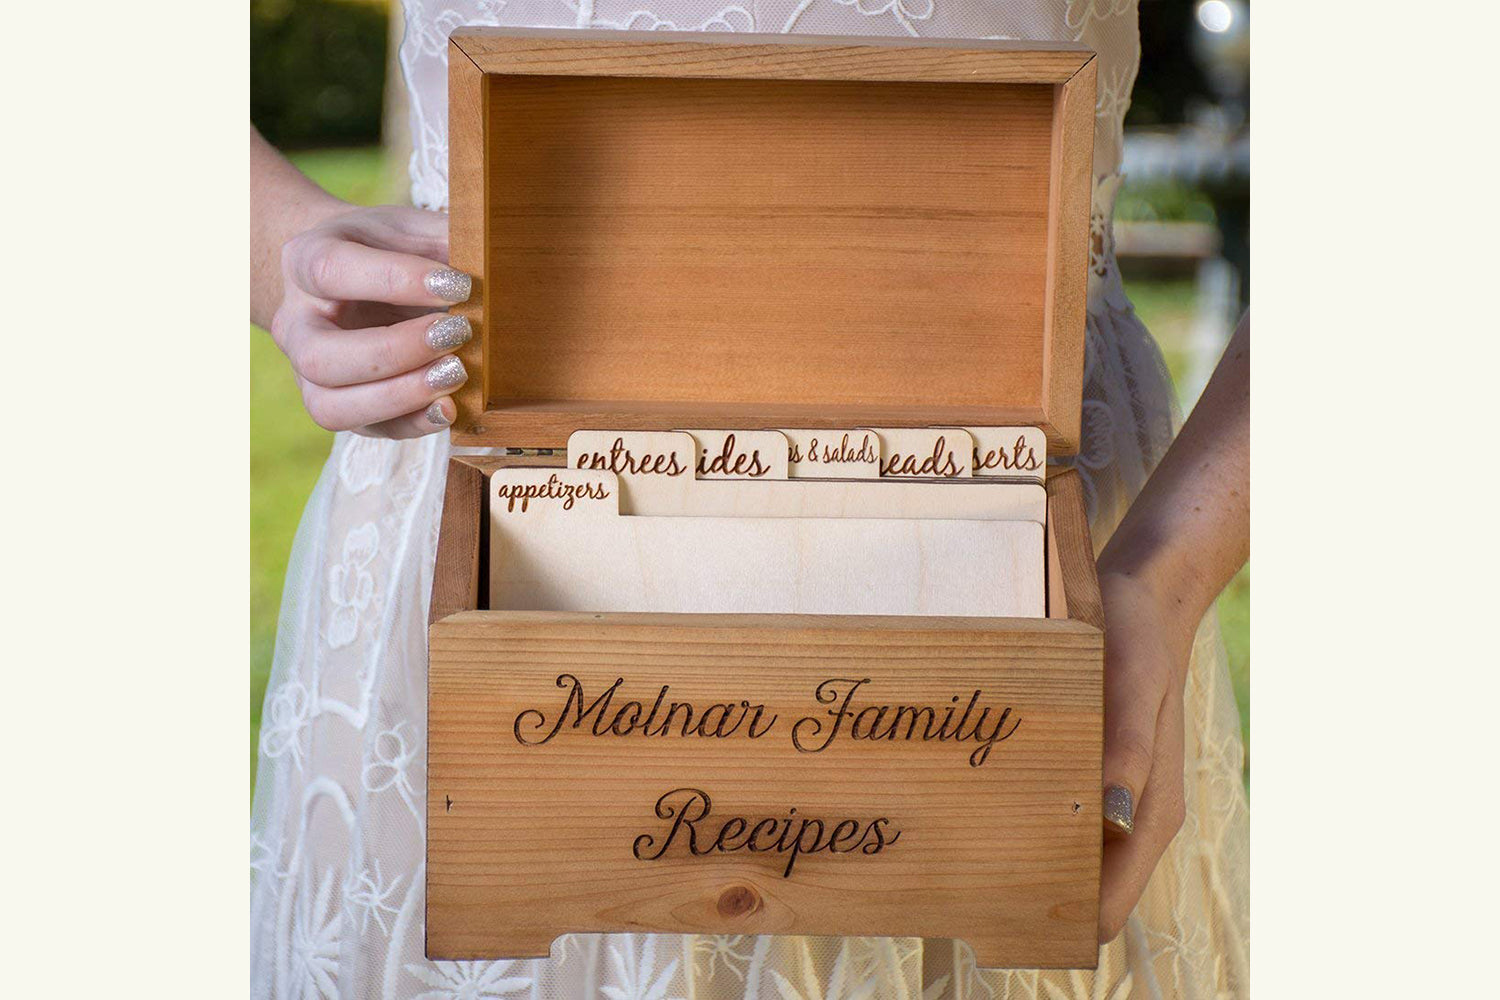 Personalized Recipe Box, Wood Recipe Box with Dividers & Recipe Cards,  Custom Card Box, Heirloom, Kitchen Gift, Handmade Recipes Storage